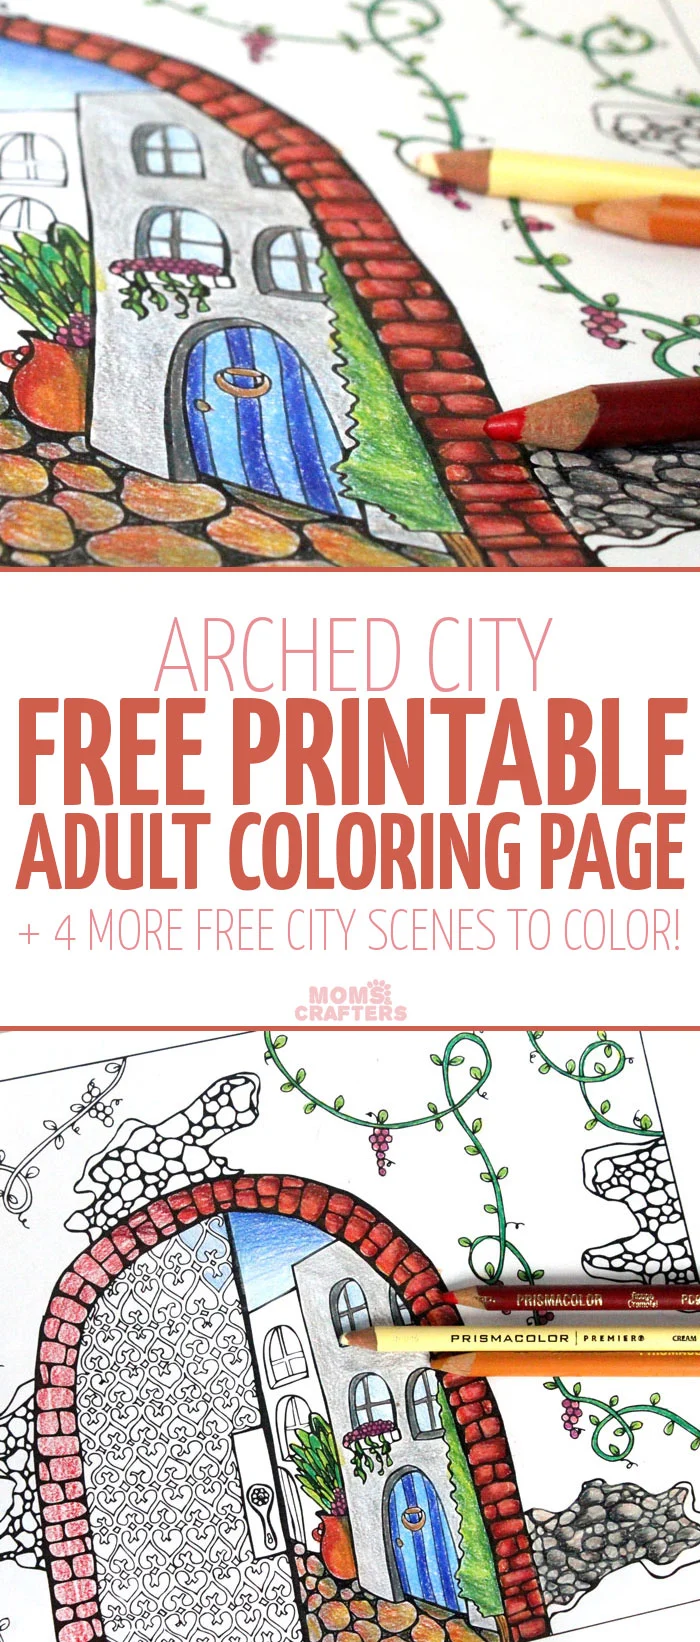 Grab this pretty amazing free printable coloring page for adults! This arched city has tons of fun detail to color, and it includes 4 more city themed colouring pages for adults for you to download for free.